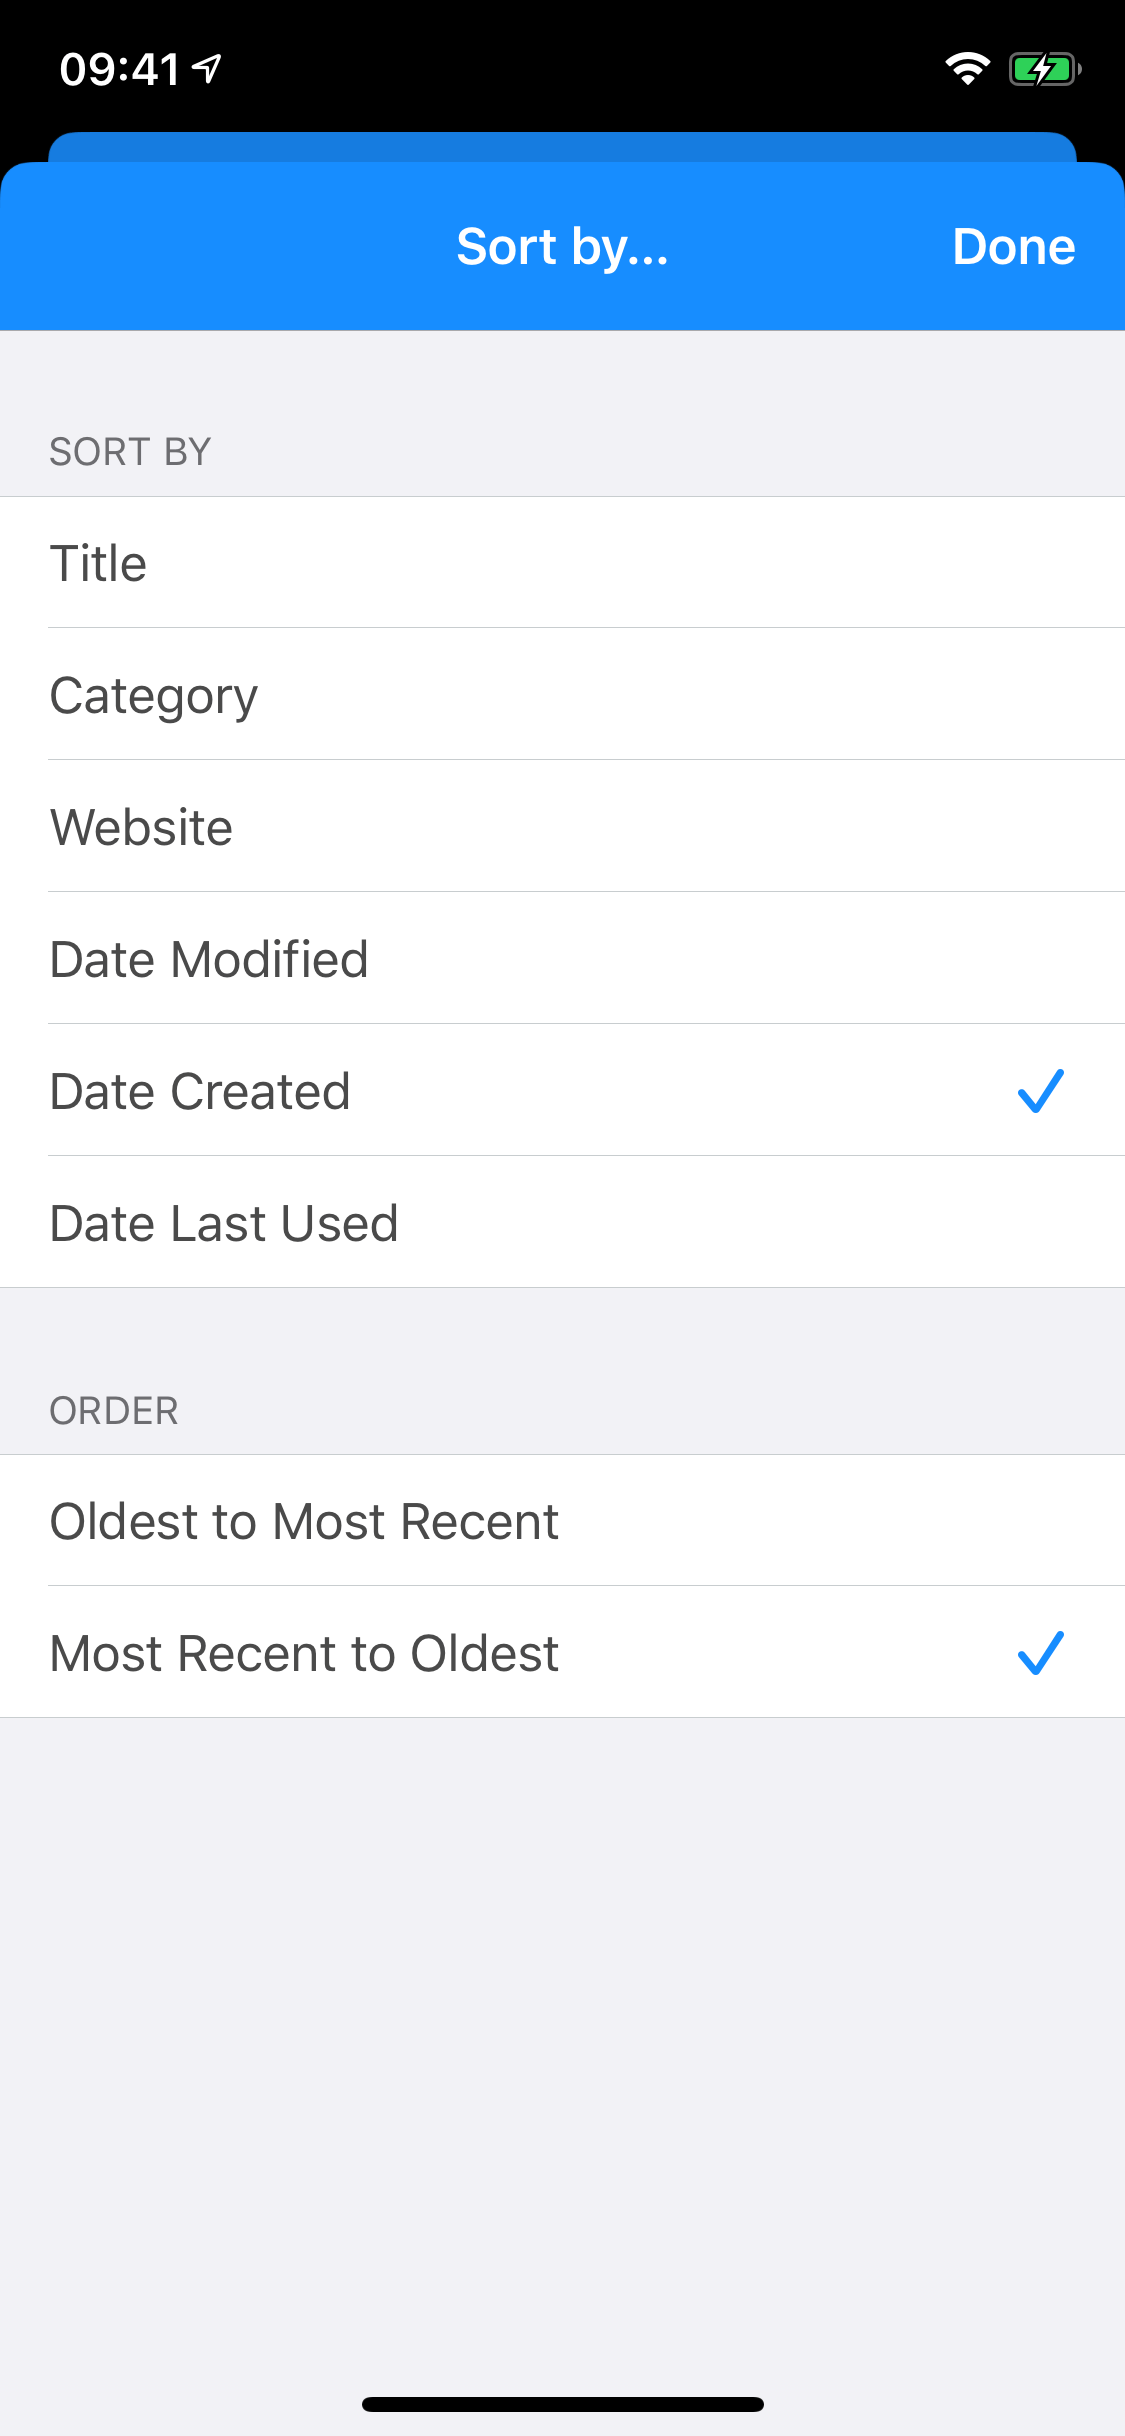 Sort by Date Created